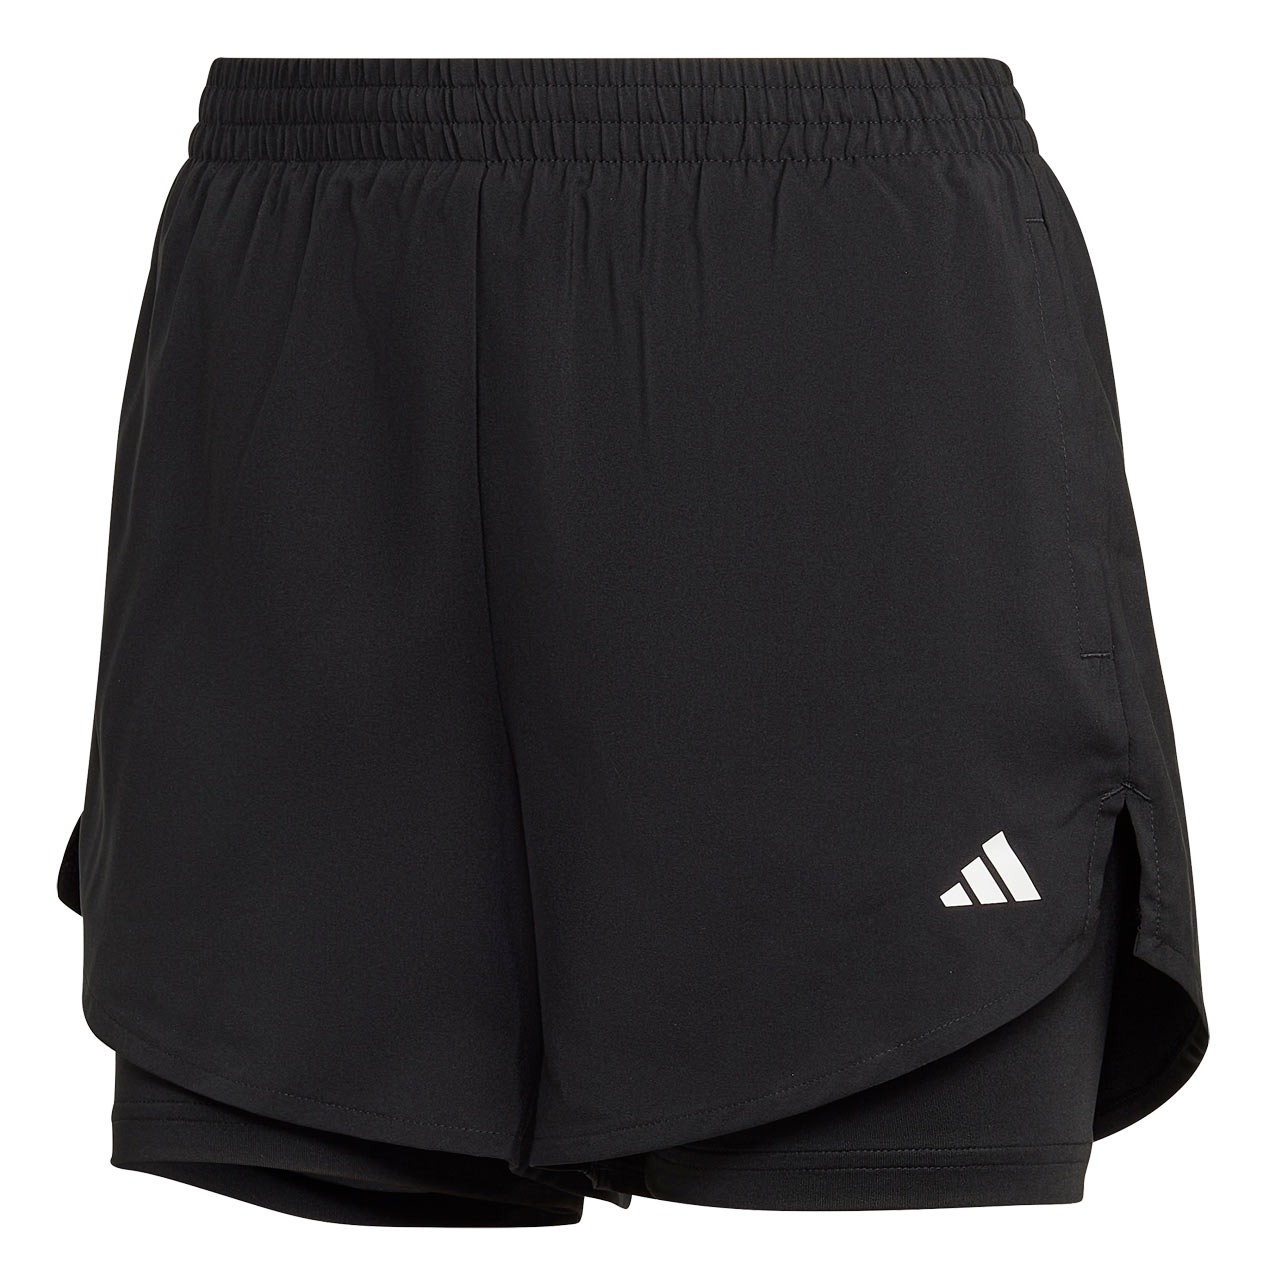 Damen Shorts Aeroready Made for Training Minimal Two-in-One